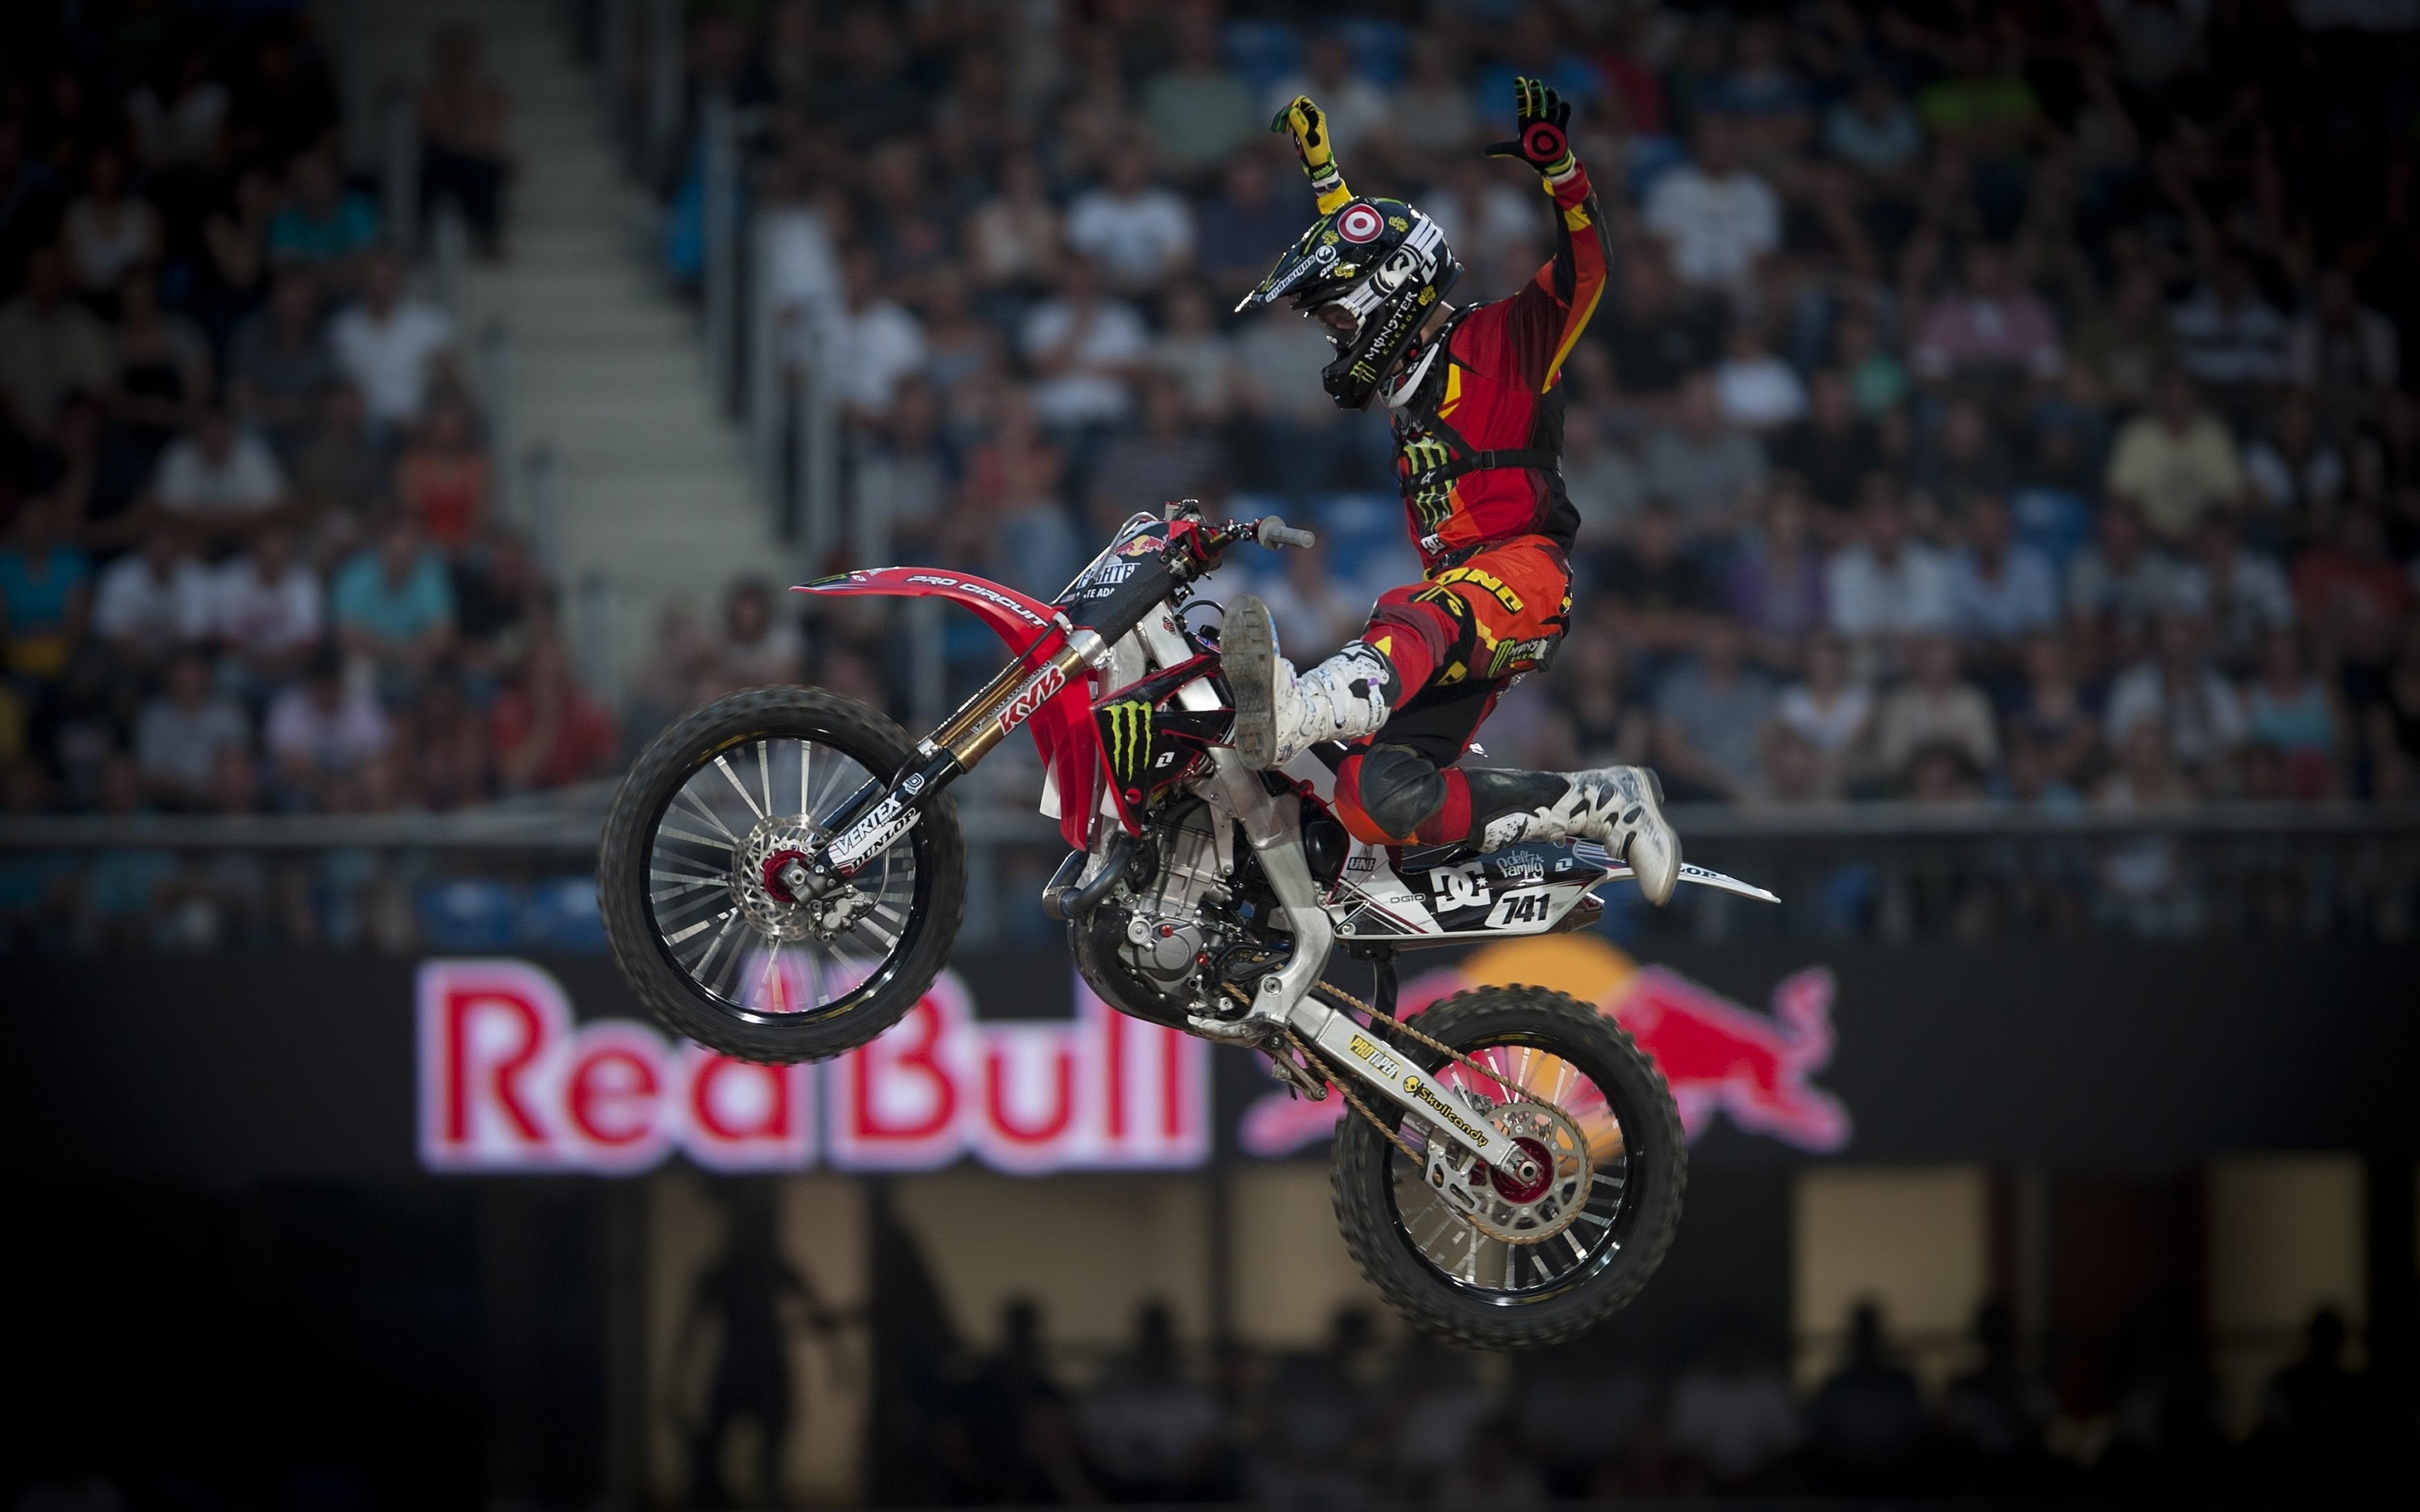 3000x1875 Red Bull X Games Nate Adams 3000x1875 Resolution Wallpaper Hd Sports 4k Wallpapers Images Photos And Background